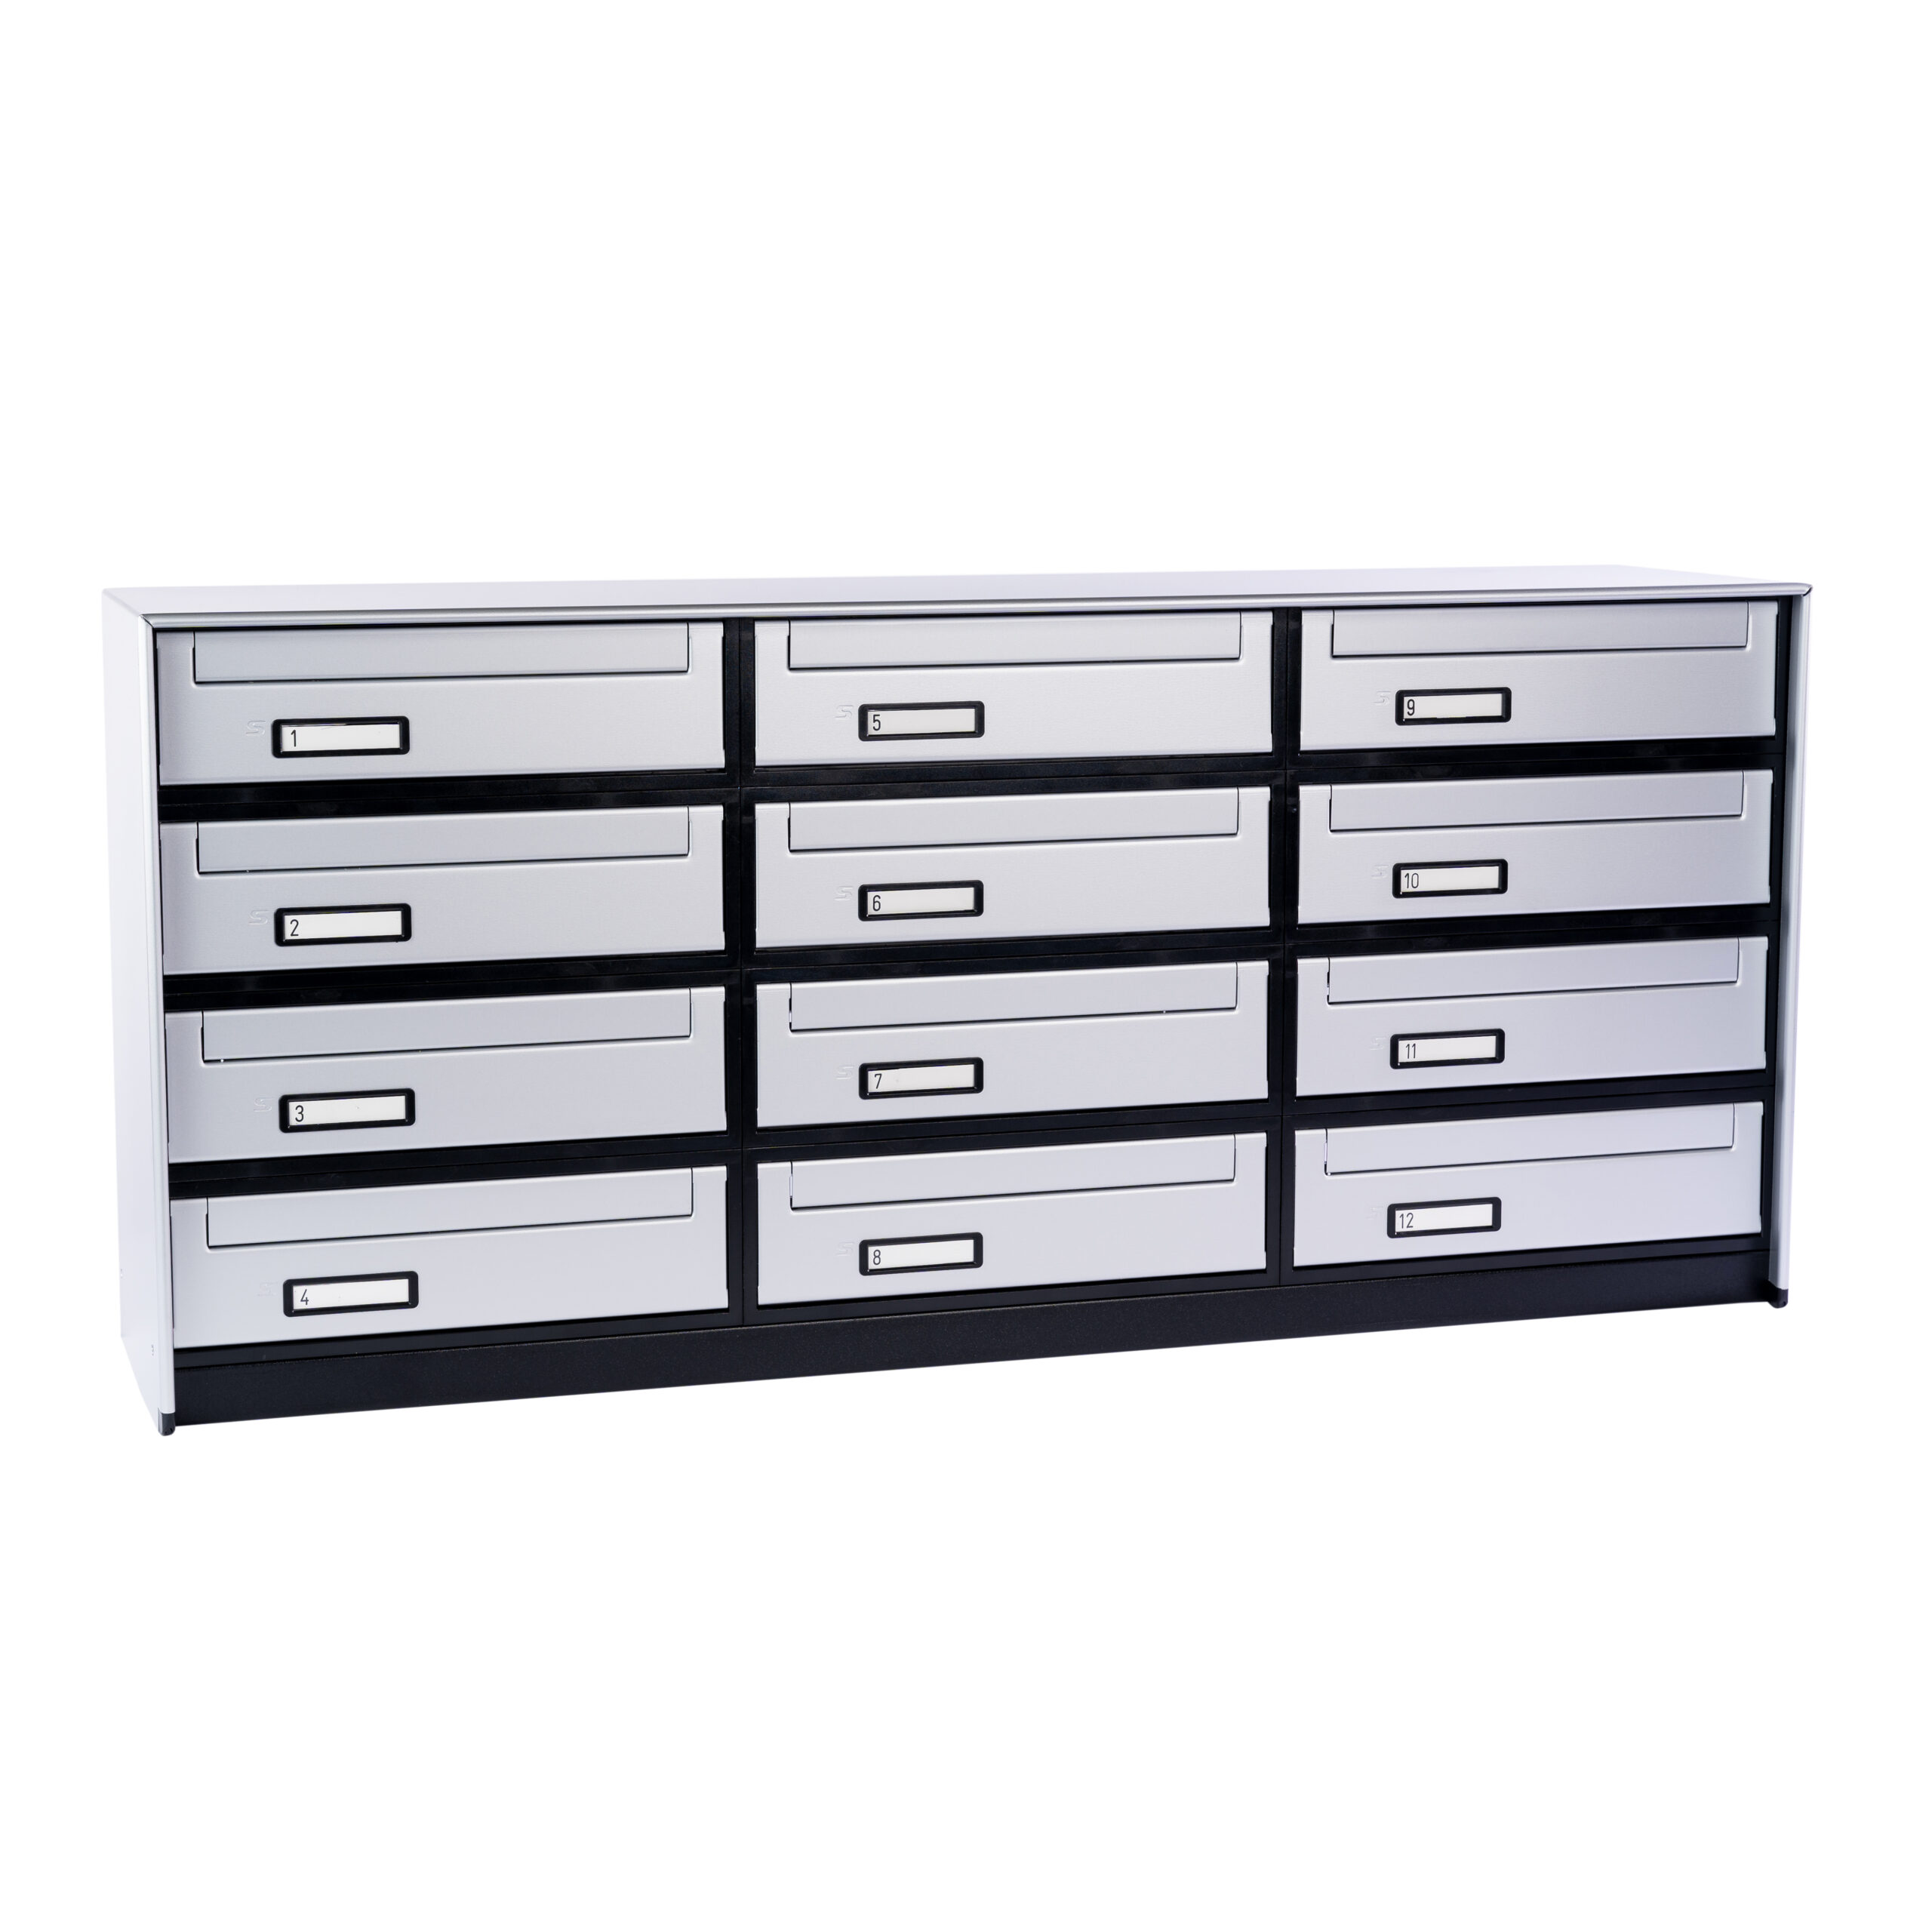 SC6 standard modular letterbox units with rear mail collection - 12 mailboxes